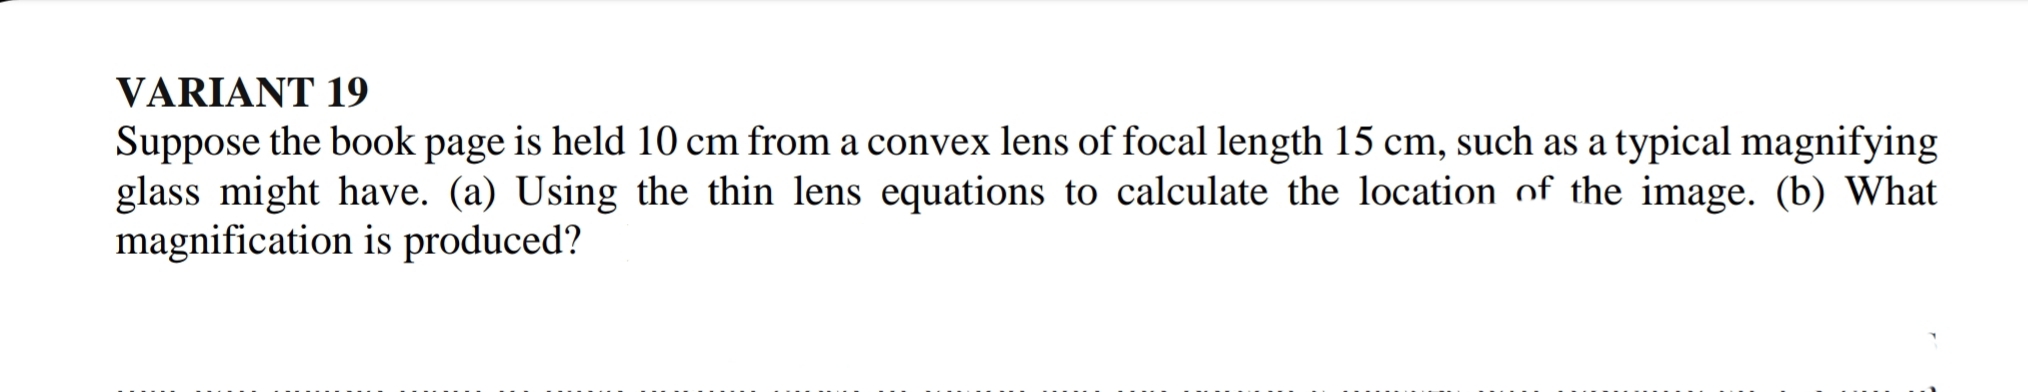 VARIANT 19
Suppose the book page is held 10 cm from a convex lens of focal length 15 cm, such as a typical magnifying
glass might have. (a) Using the thin lens equations to calculate the location of the image. (b) What
magnification is produced?
